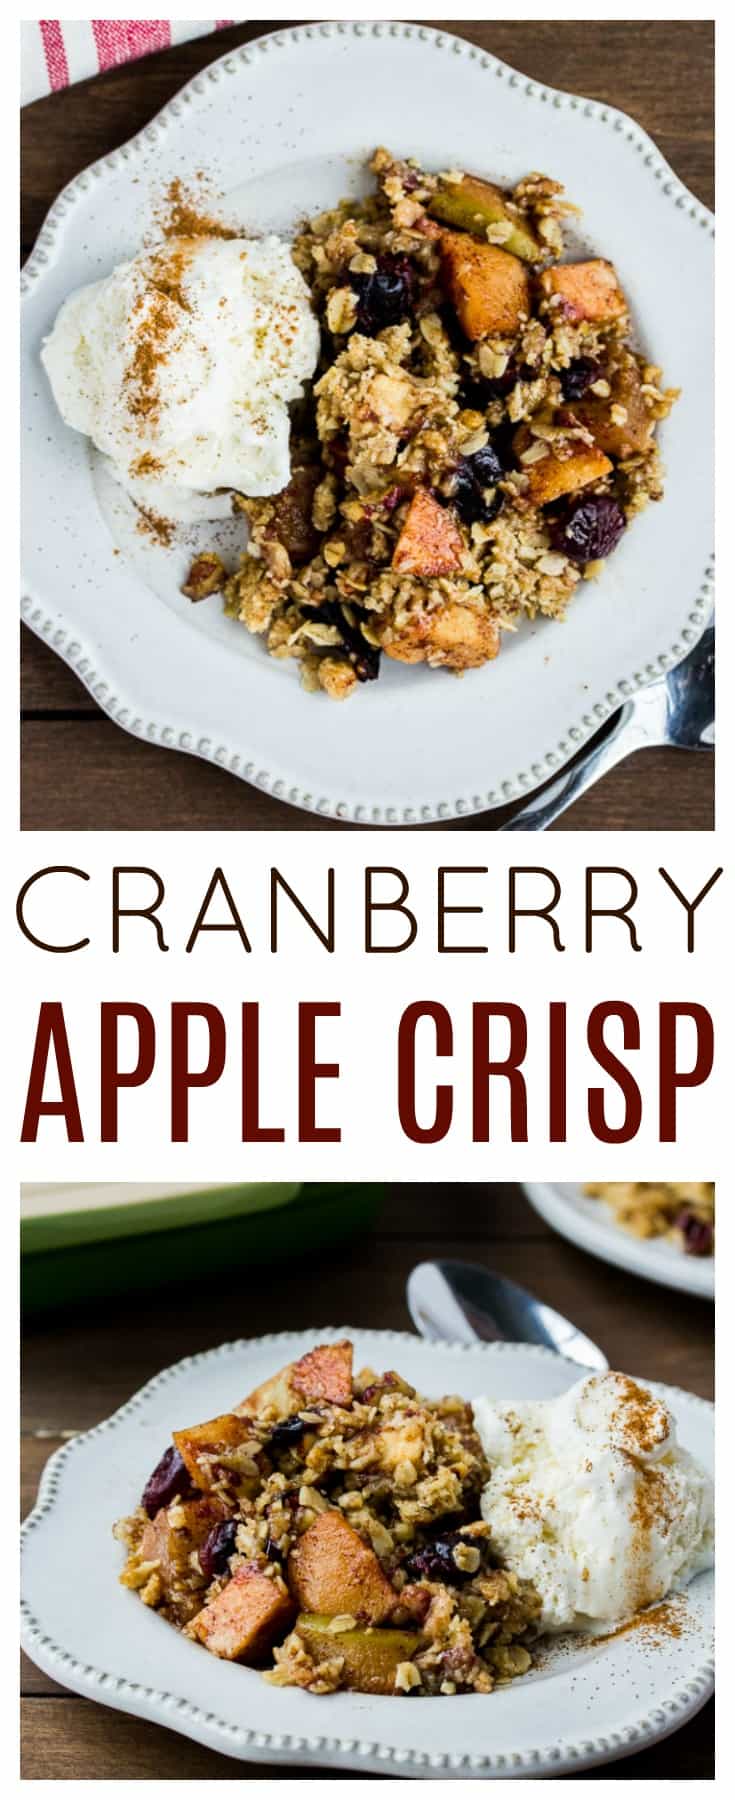 Apple Cranberry Crisp - Apples and cranberries combine with spices and a crispy topping for a delicious easy dessert recipe! Serve warm with vanilla ice cream to sweeten the deal even more! This recipe can easily be made gluten free. | #dlbrecipes #applecranberrycrisp #applecrisp #applerecipe #glutenfree #dessert